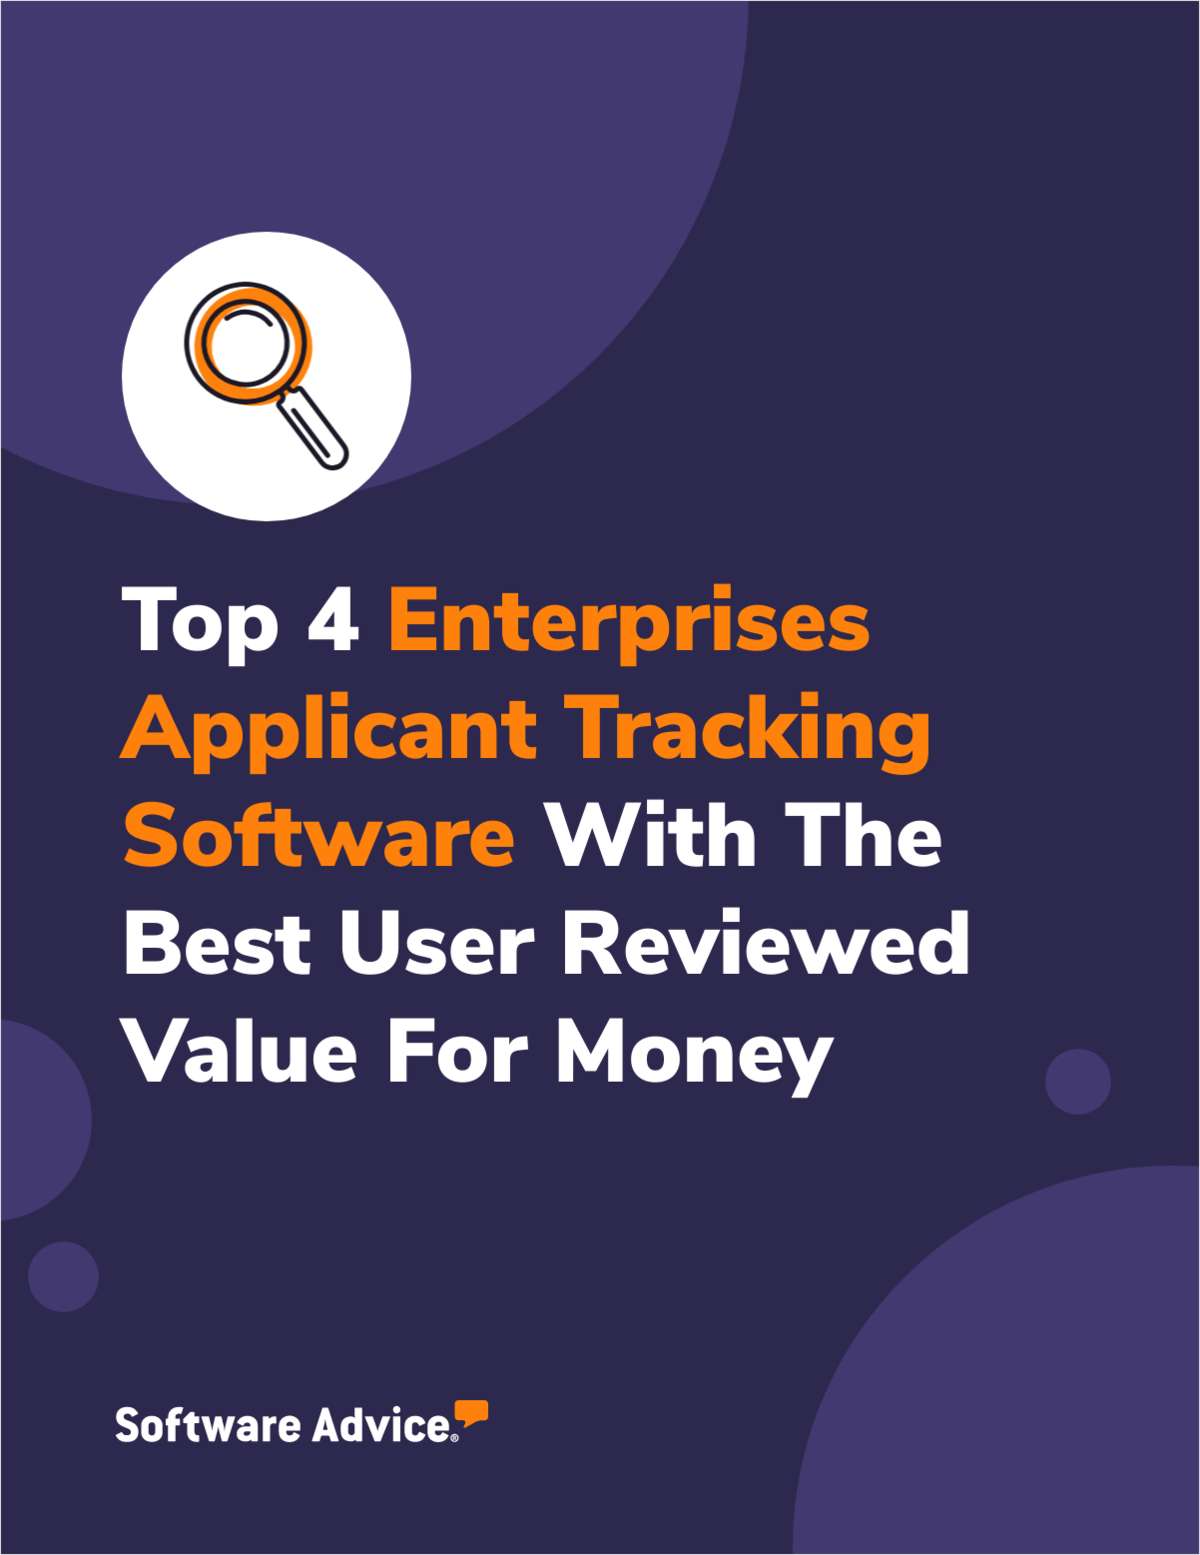 Top 4 Enterprise Business Applicant Tracking Software With the Best User Reviewed Value for Money